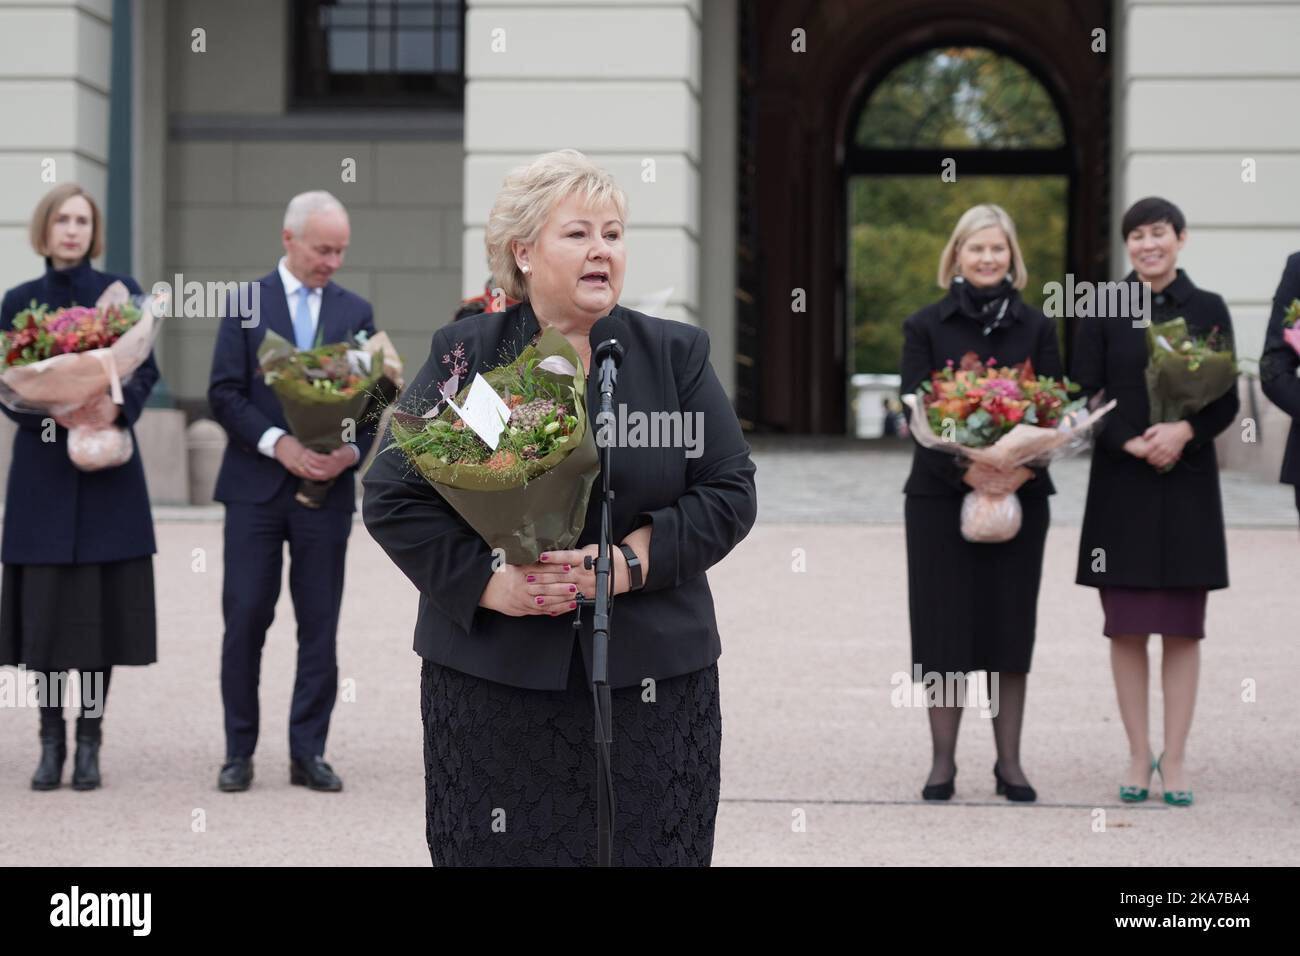 Oslo 20211014. Prime Minister Erna Solberg in front of f.v. Iselin Nybo, Jan Tore Sanner, Guri Melby and Ine Eriksen Soreide, after the outgoing government's last minister at the castle. Photo: Ole Berg-Rusten / NTB  Stock Photo